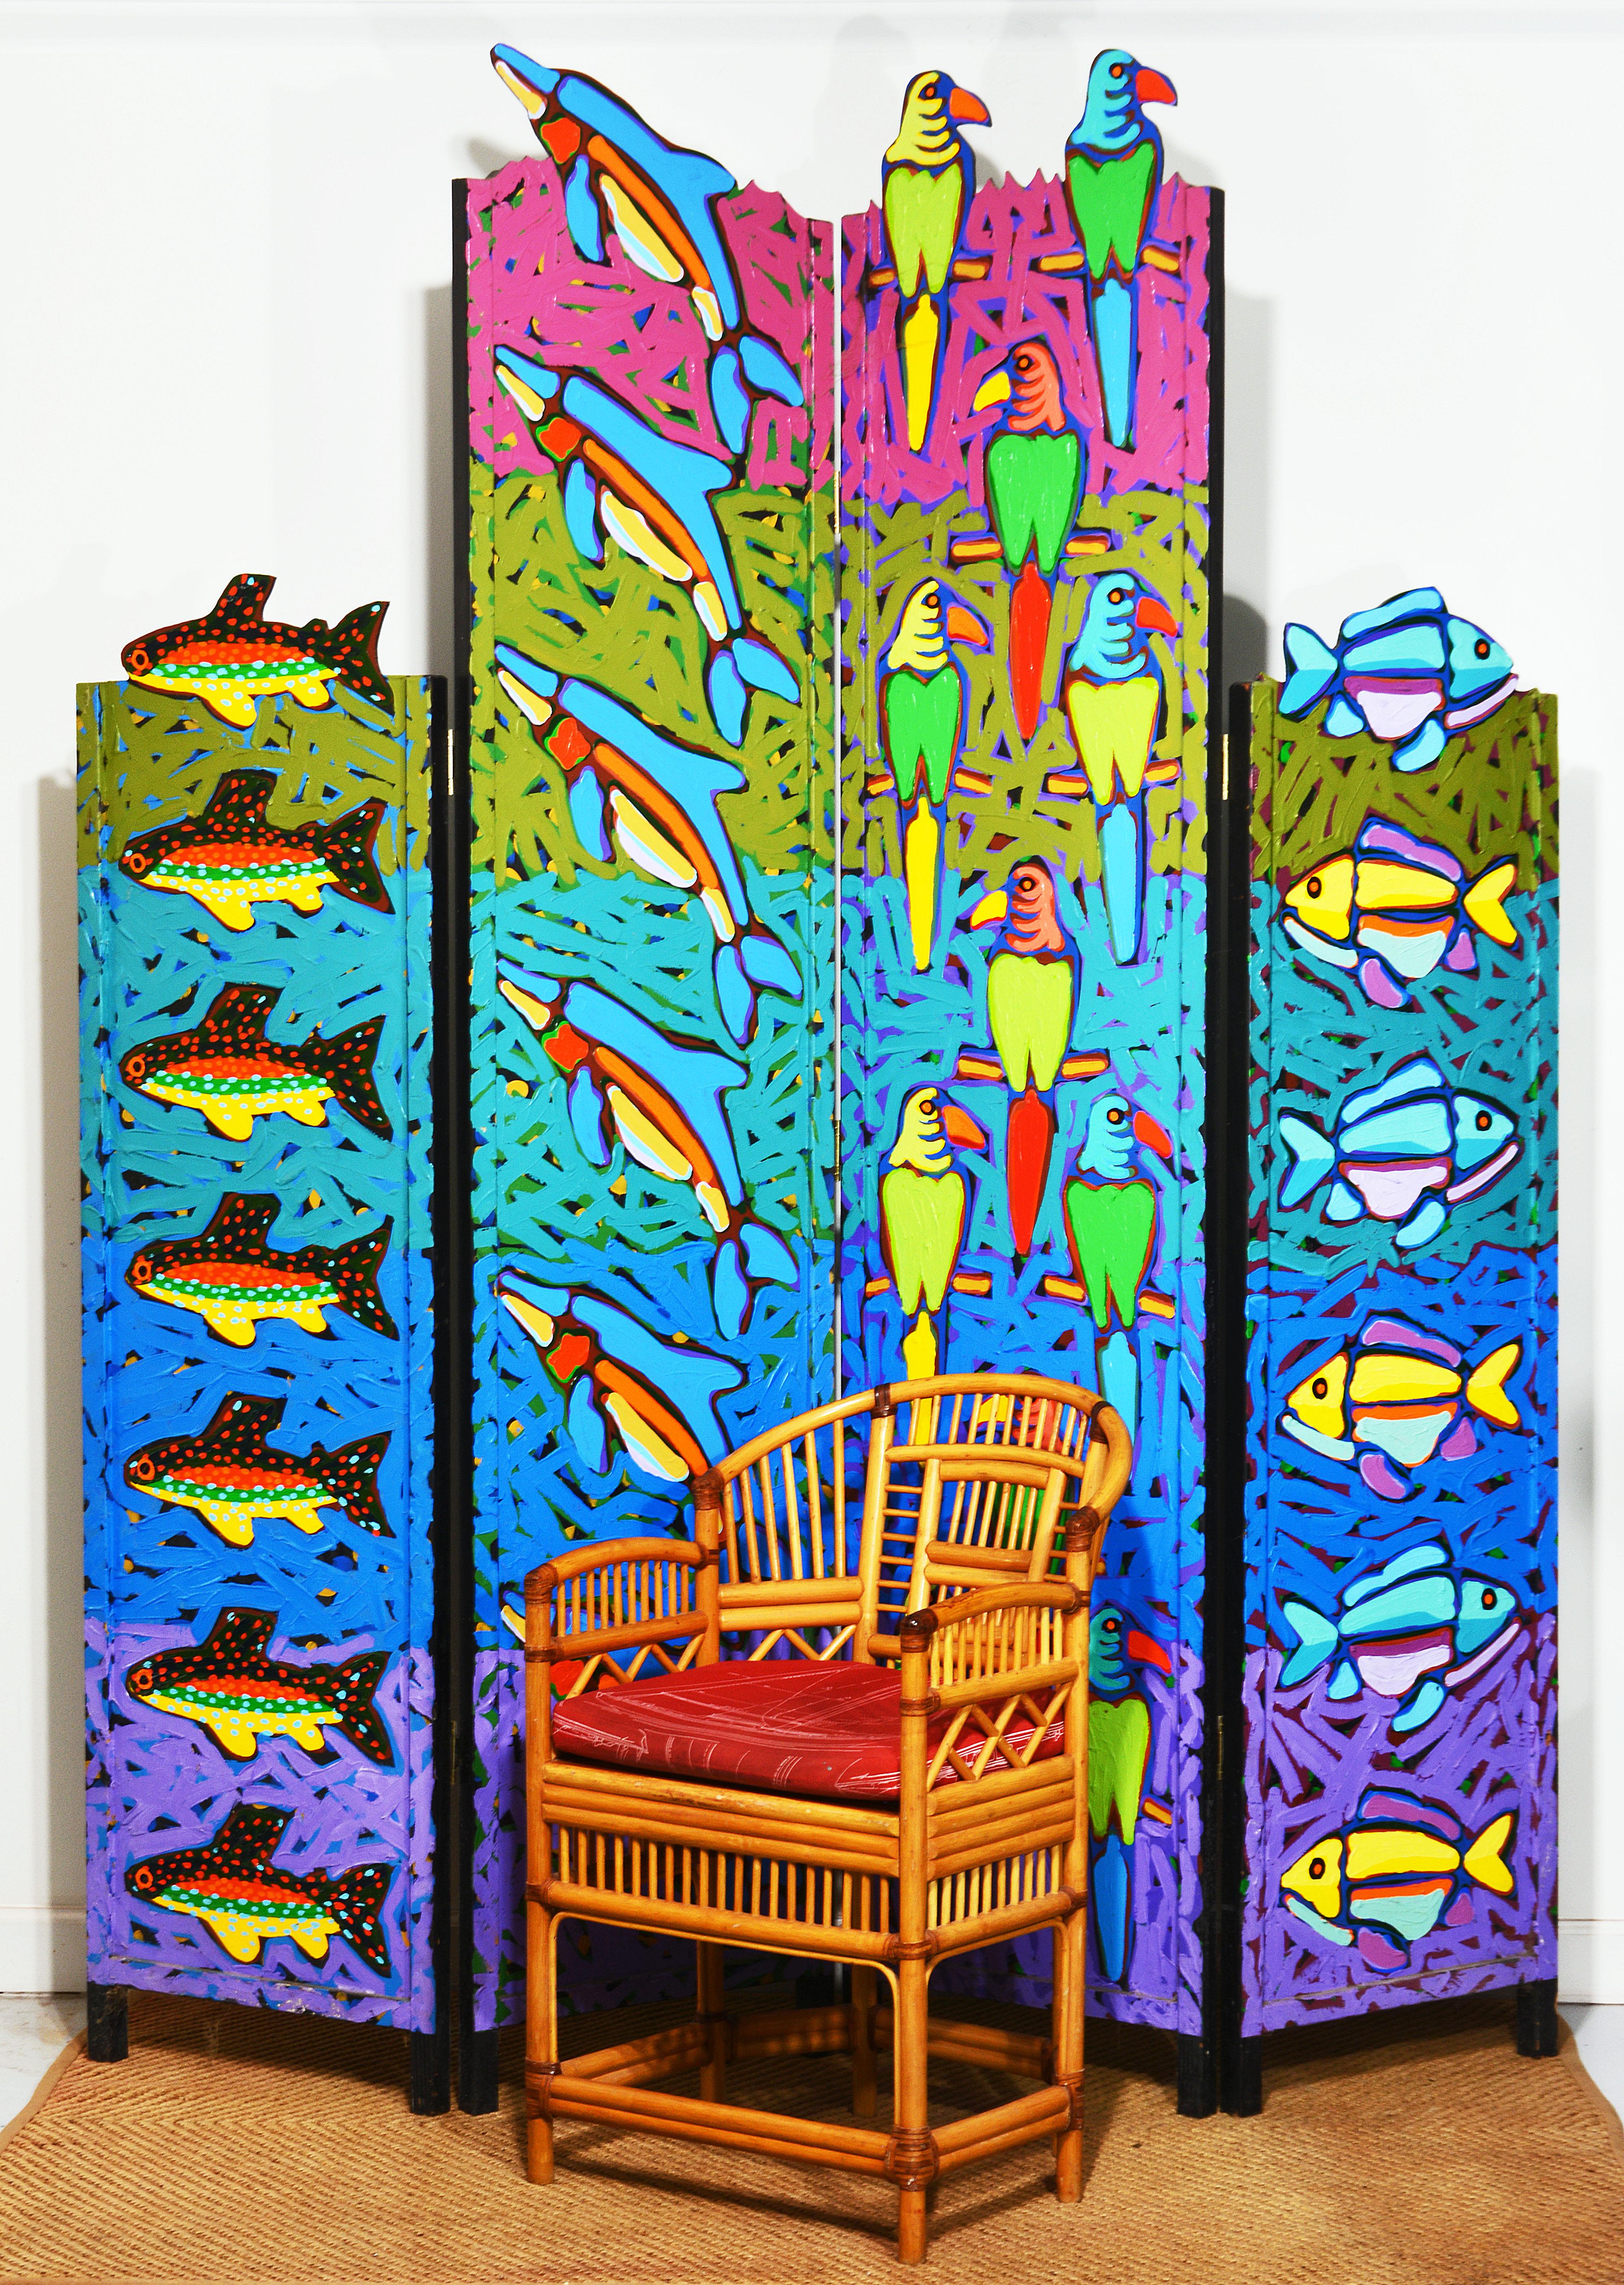 This folding screen by the Atlanta and Savannah artist and professor Sam Francis is a splendid display of vibrant colors, tropical fish and parrots. It evokes Florida notions. As a painting it stretches out beyound traditional limits braking the